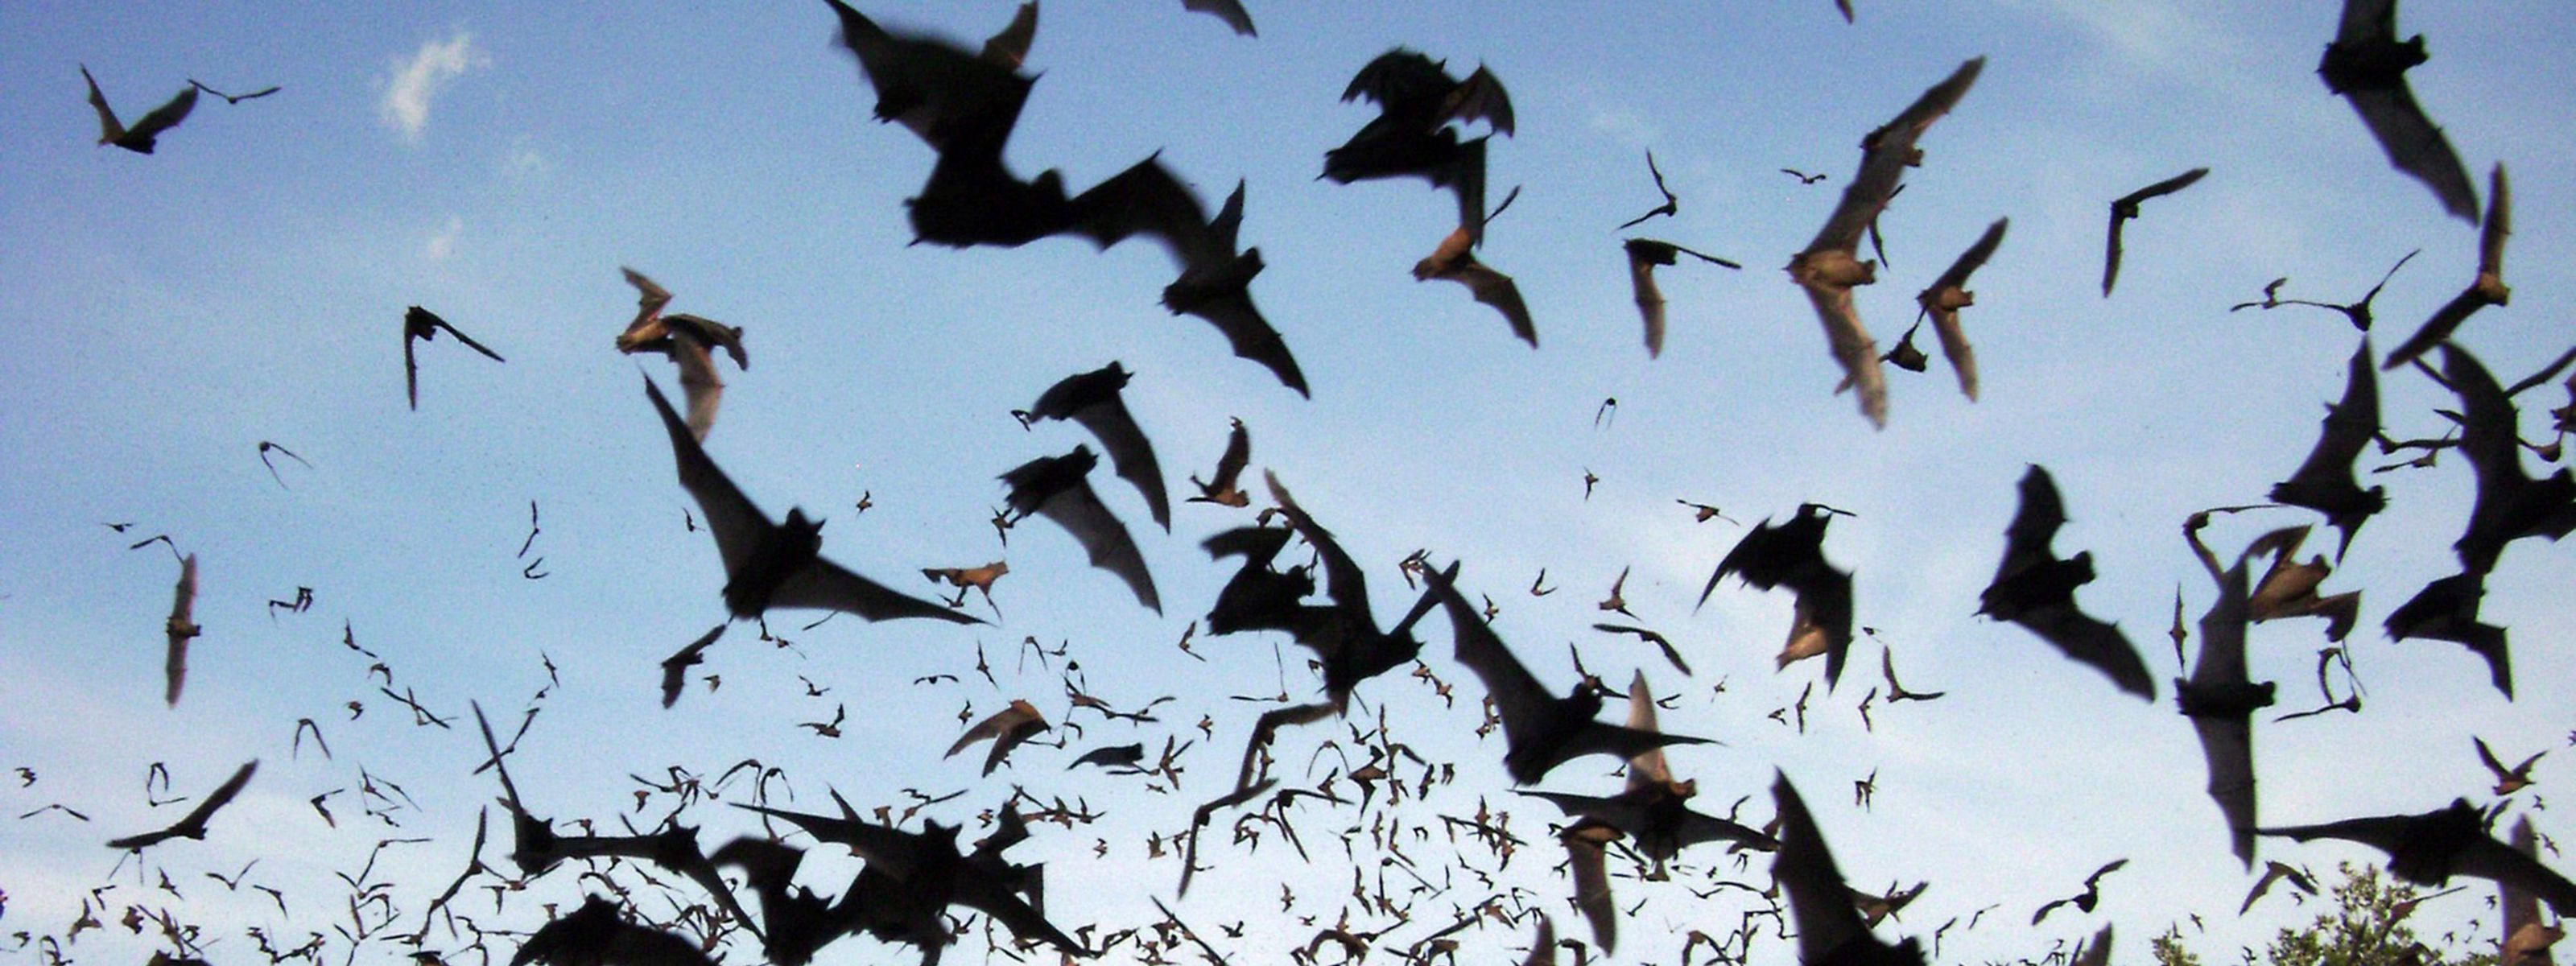 Swarm of bats leave a cave.